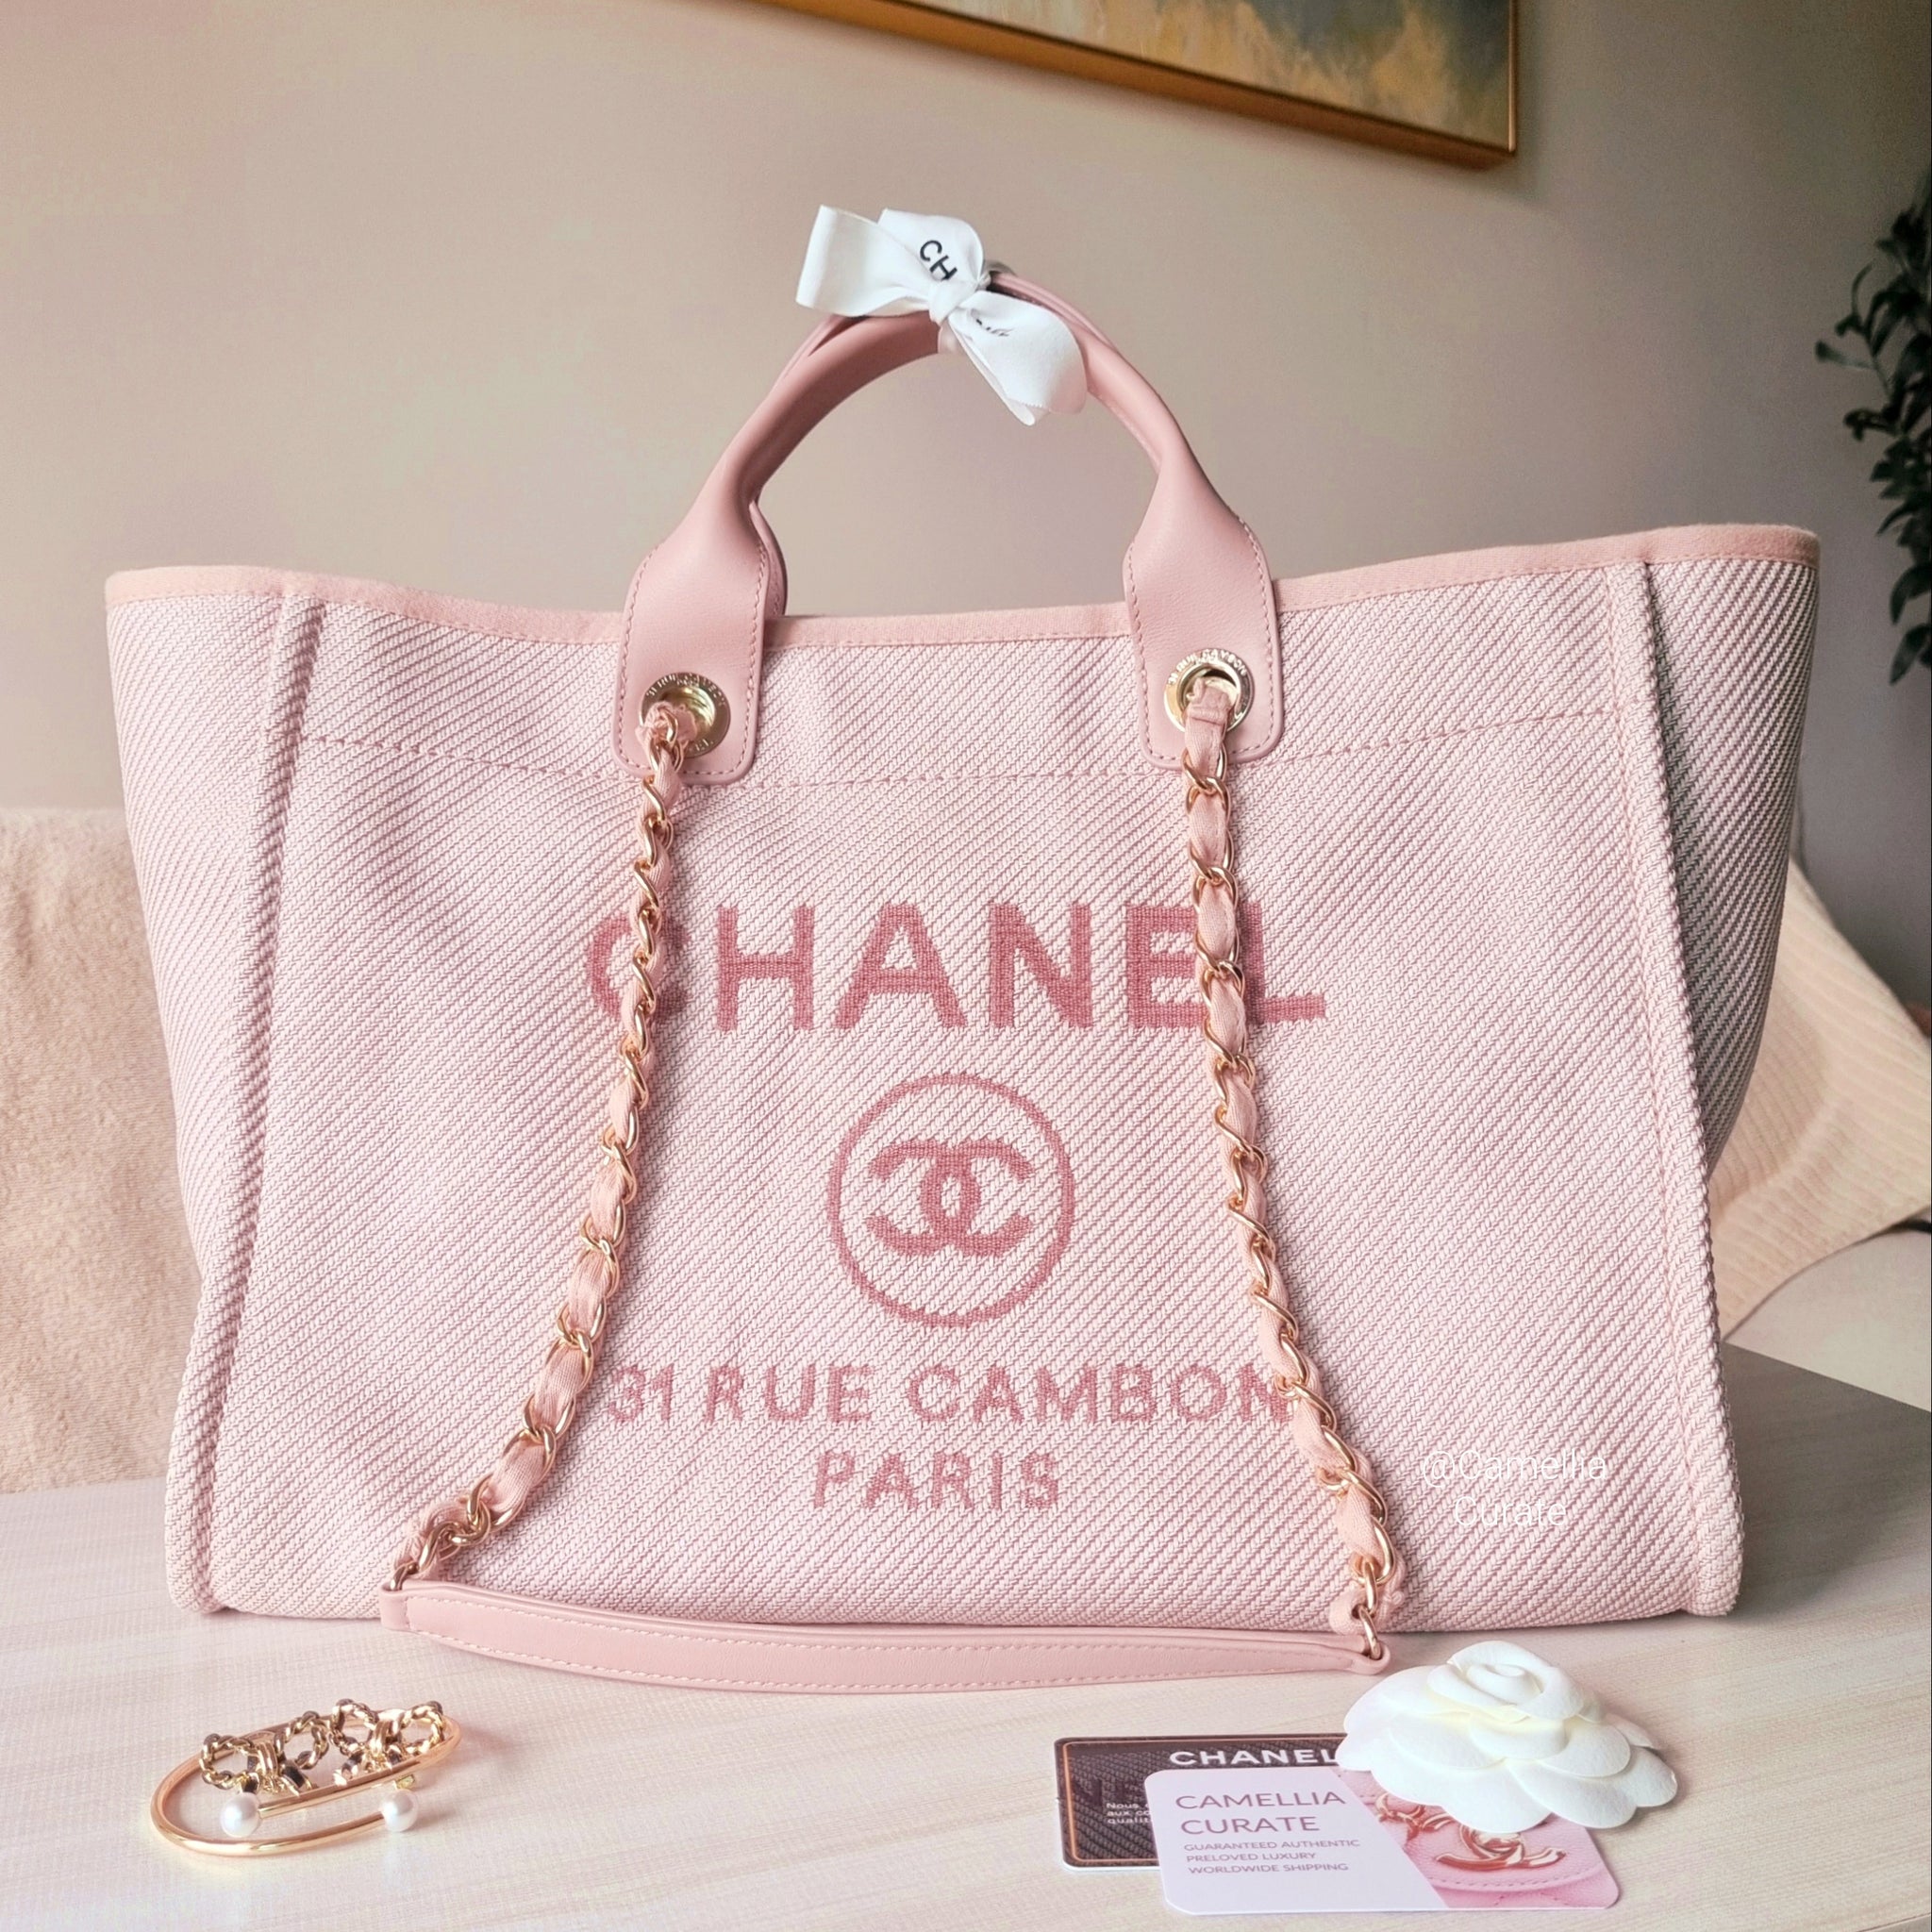 Chanel Rose Pink Deauville Medium Gold HW – CamelliaCurate